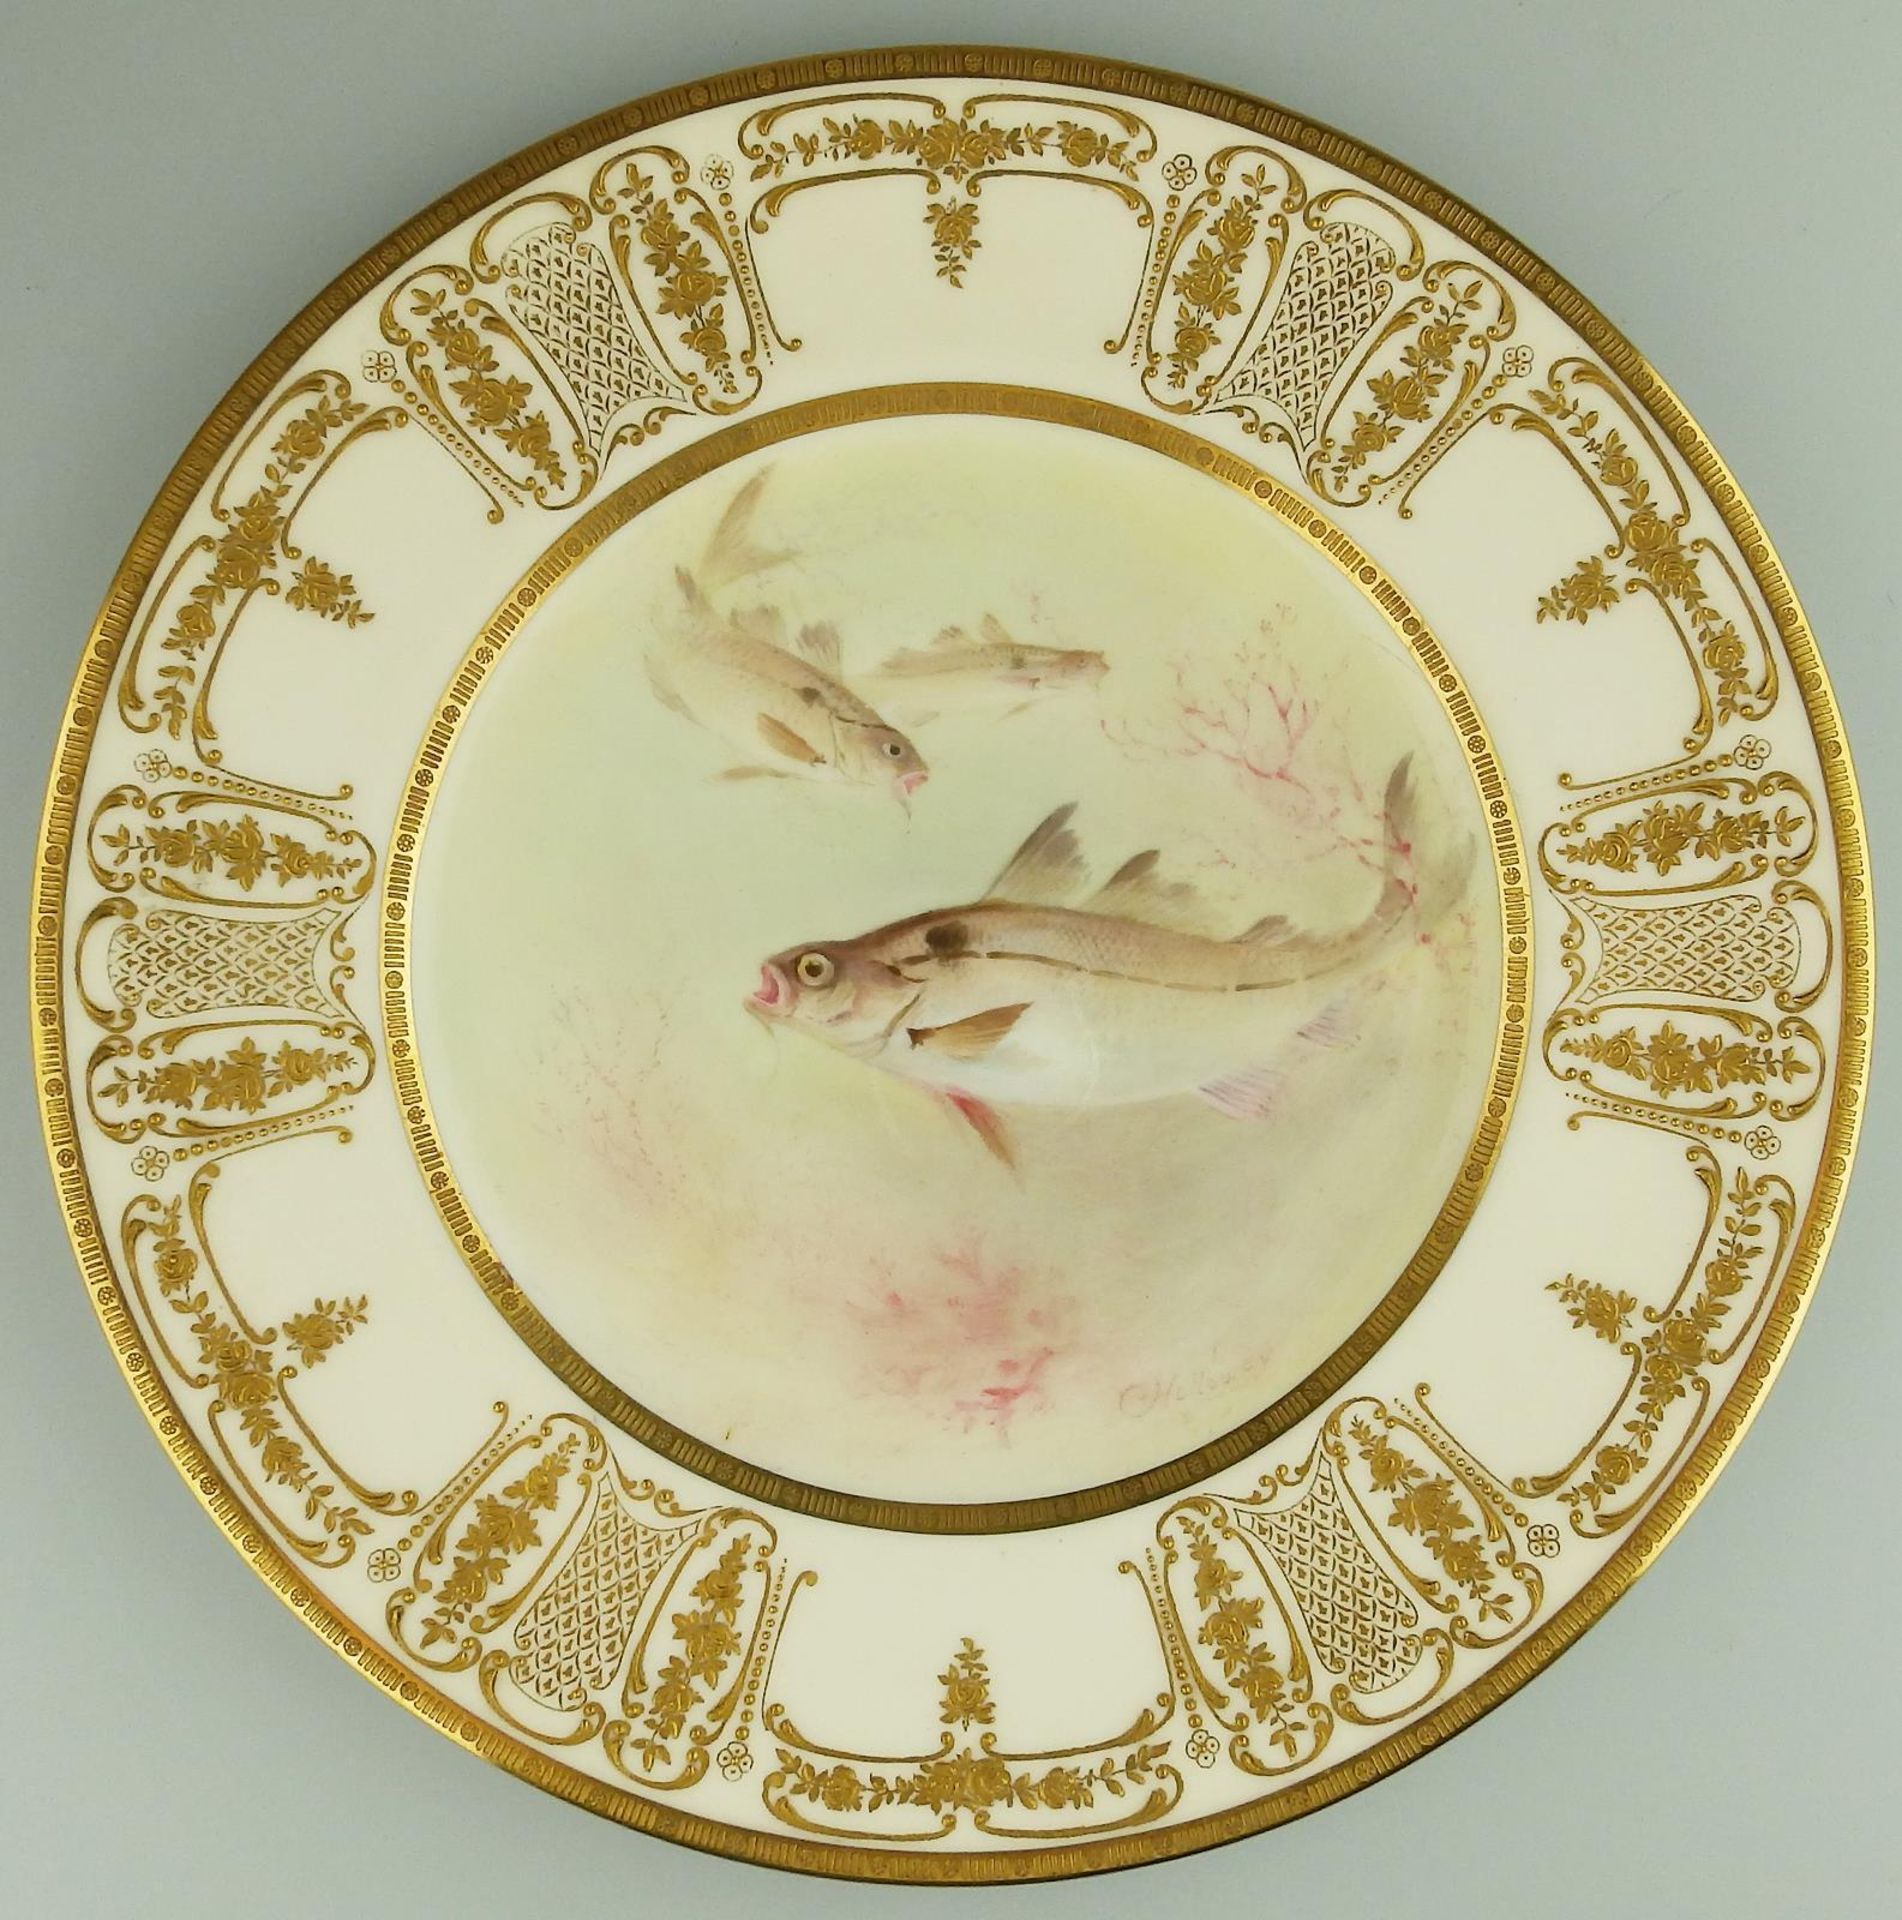 A wonderful Royal Doulton hand painted with Fish Cabinet Plate by CHolloway C.1900